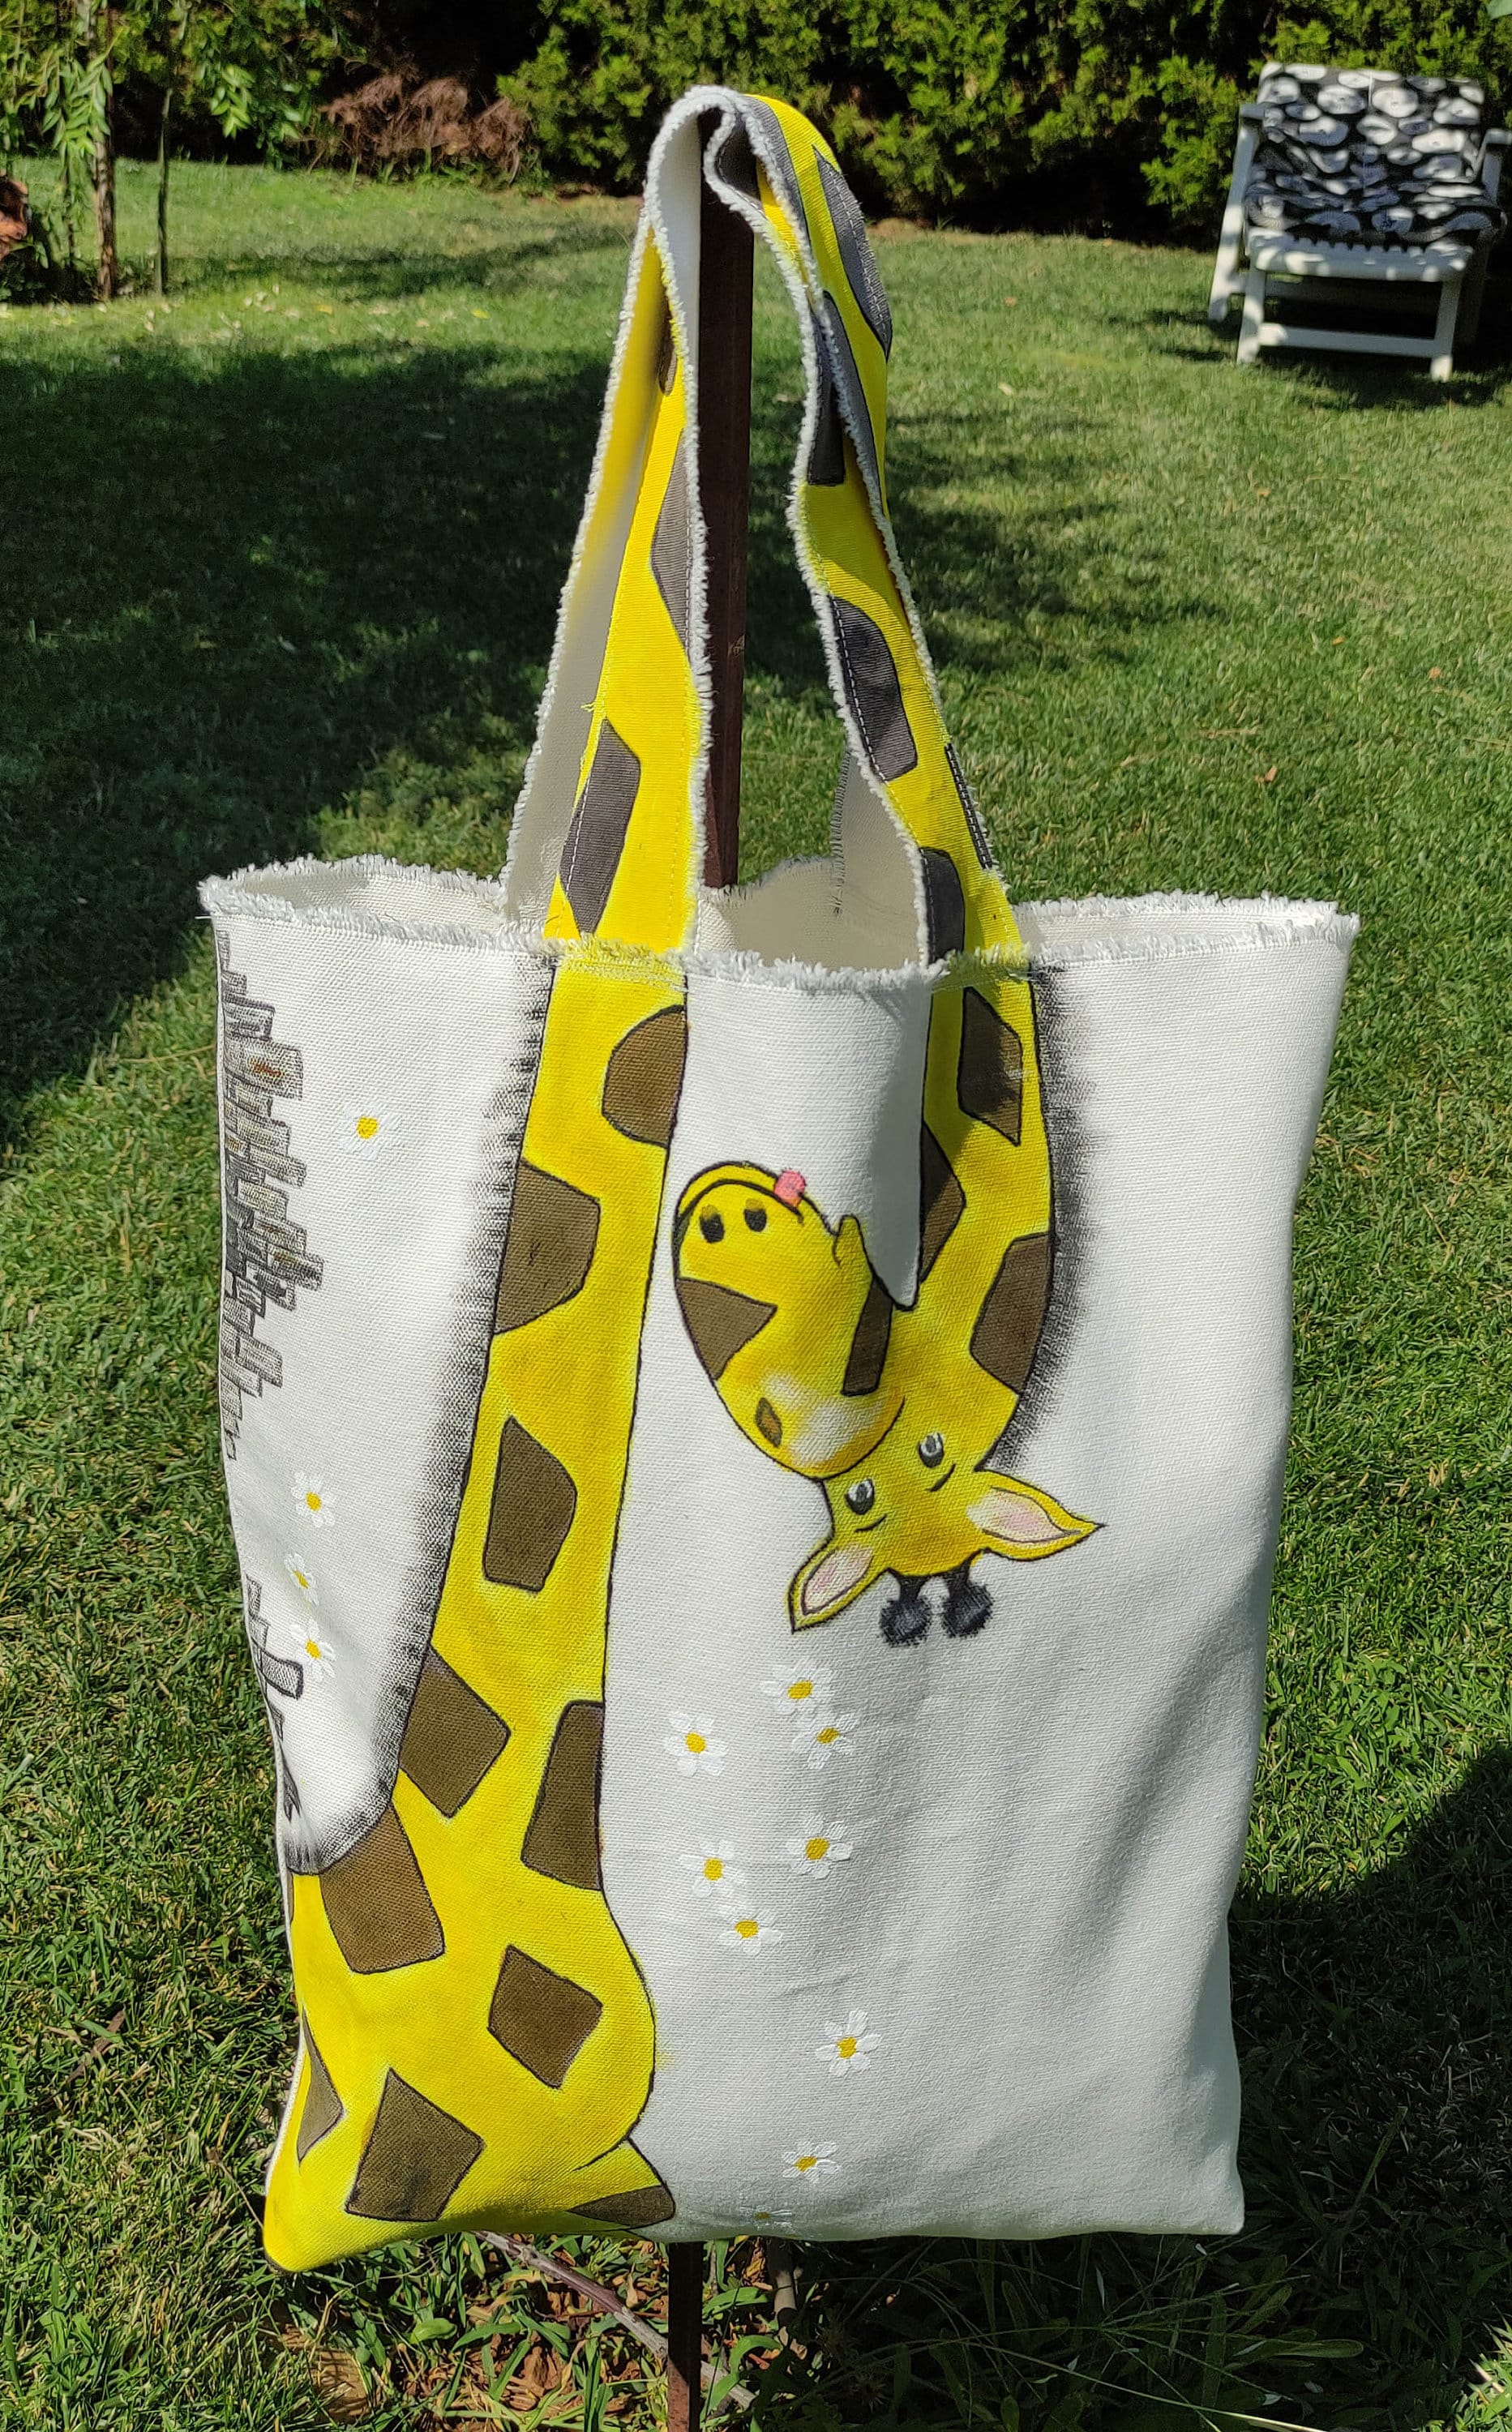 Our 100% cotton and natural hand painted tote bags finished off with the leather straps are tote-ally one of a kind which are perfect for all use!